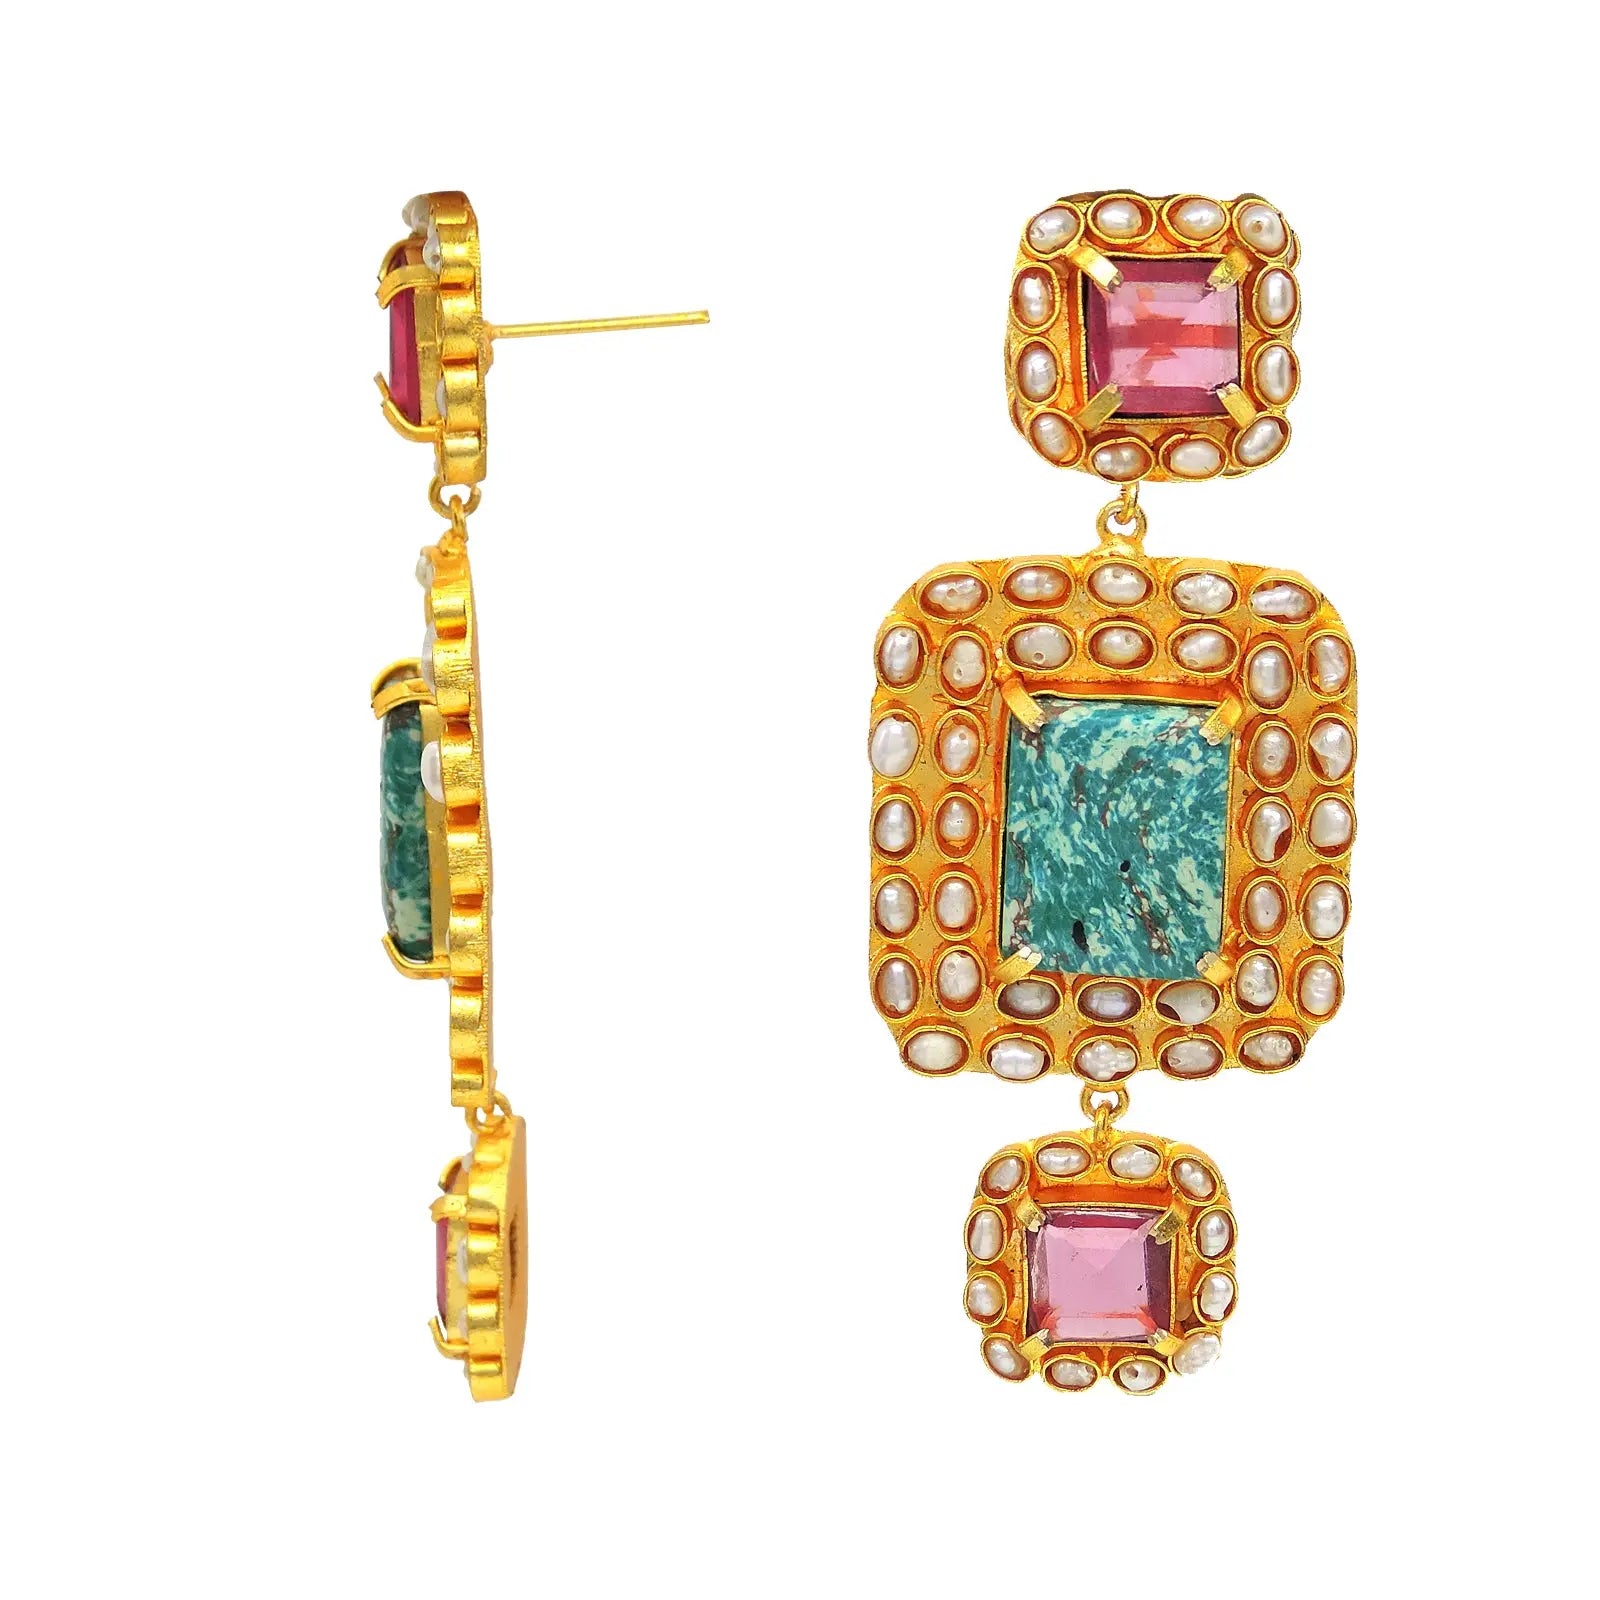 Ginto Danglers- Handcrafted Jewellery from Dori